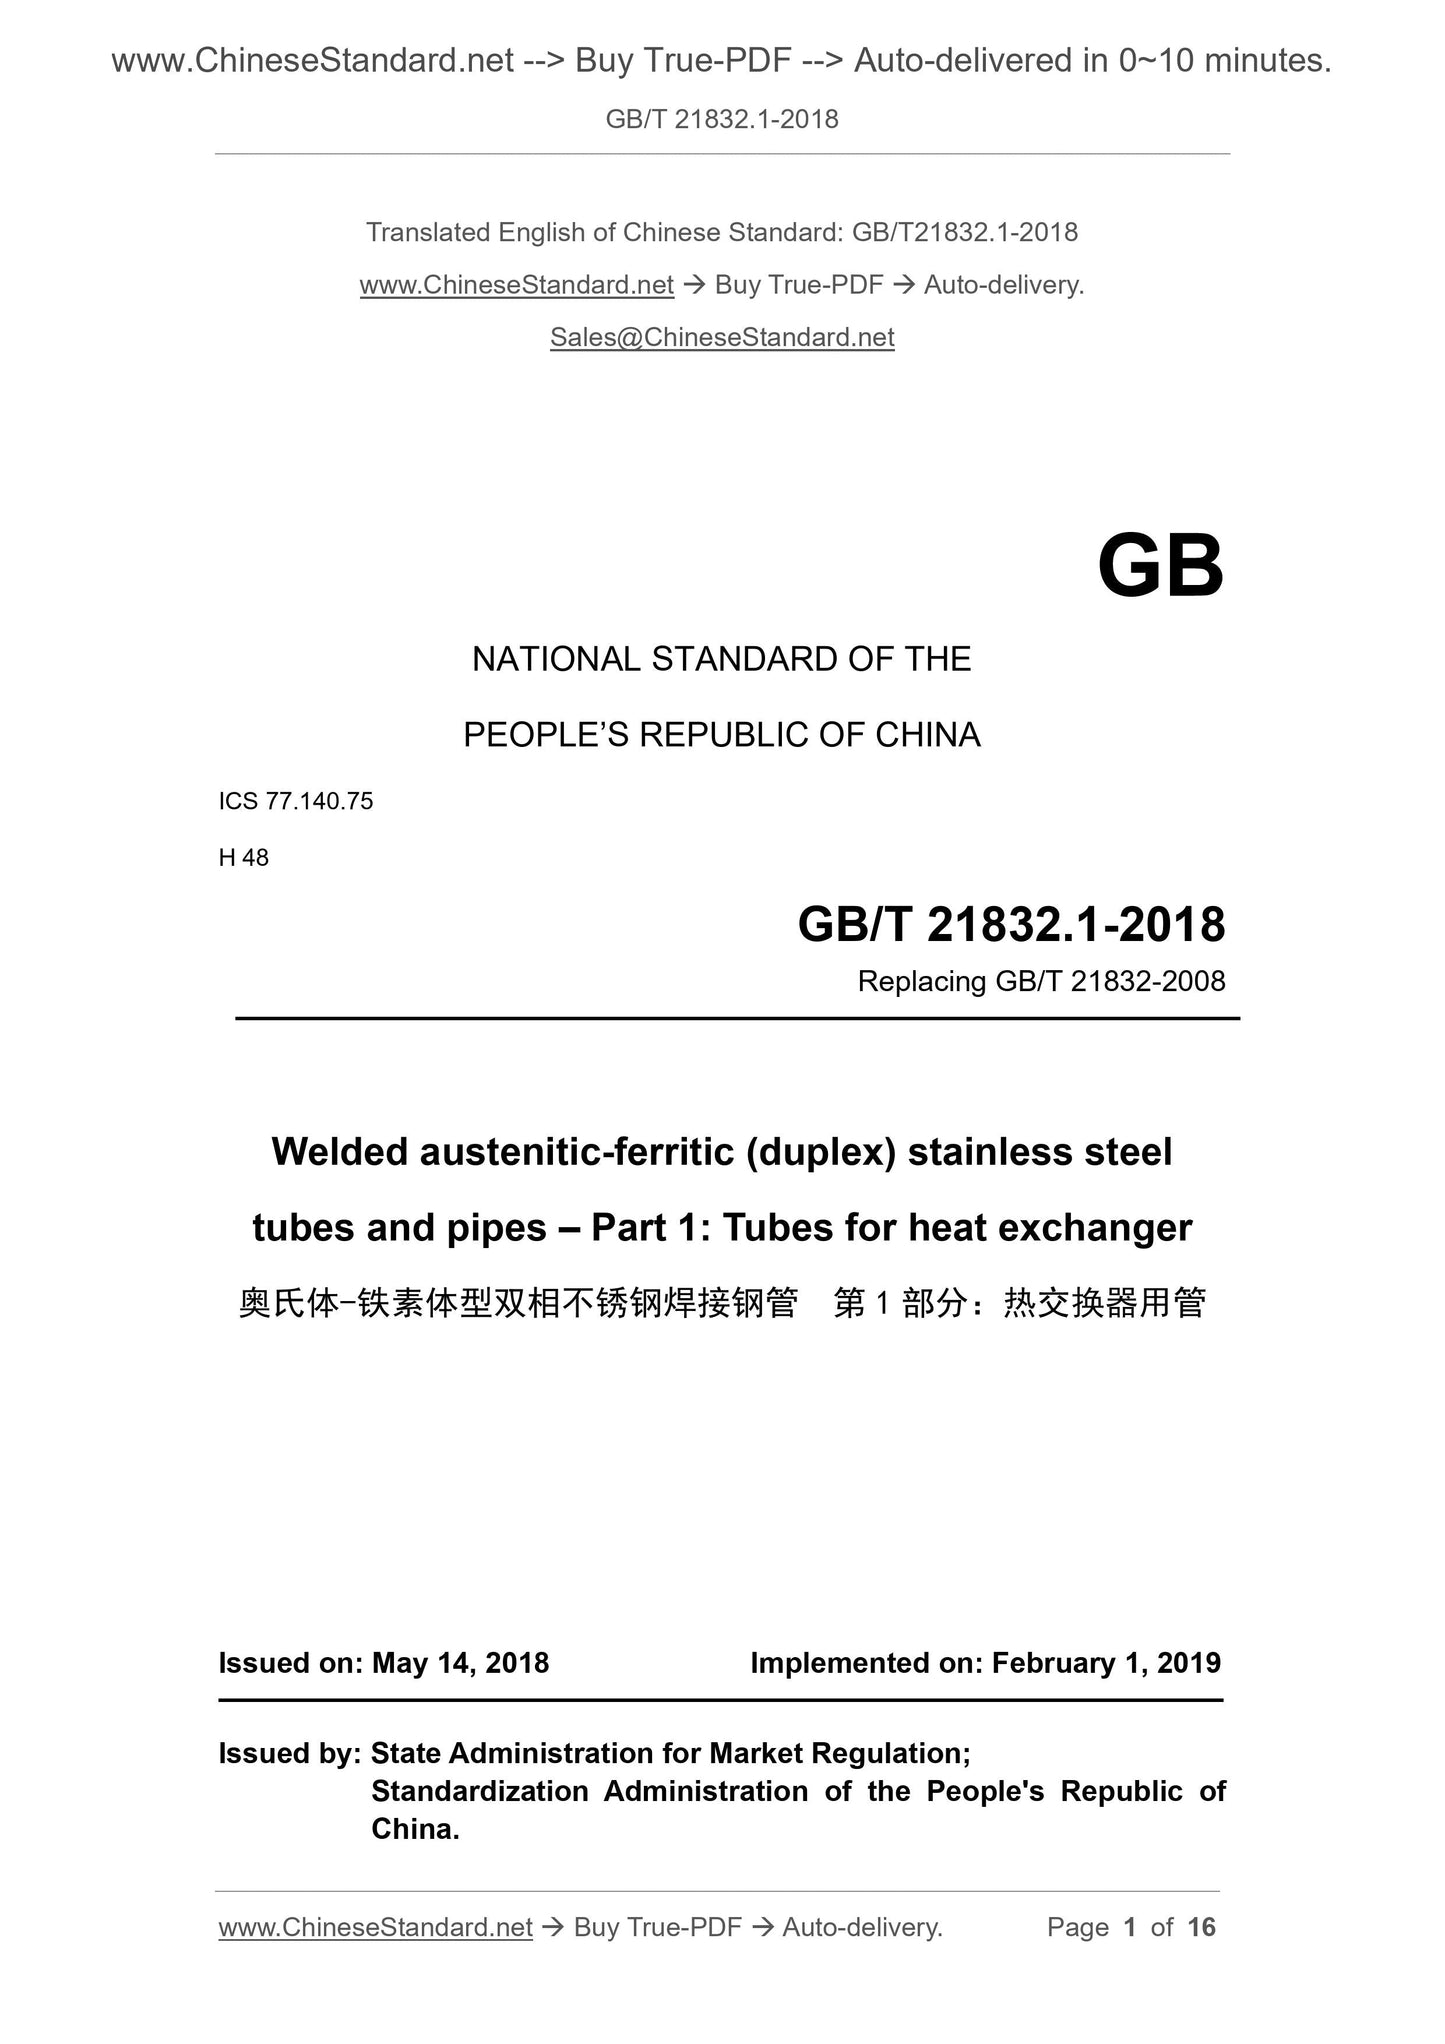 GB/T 21832.1-2018 Page 1